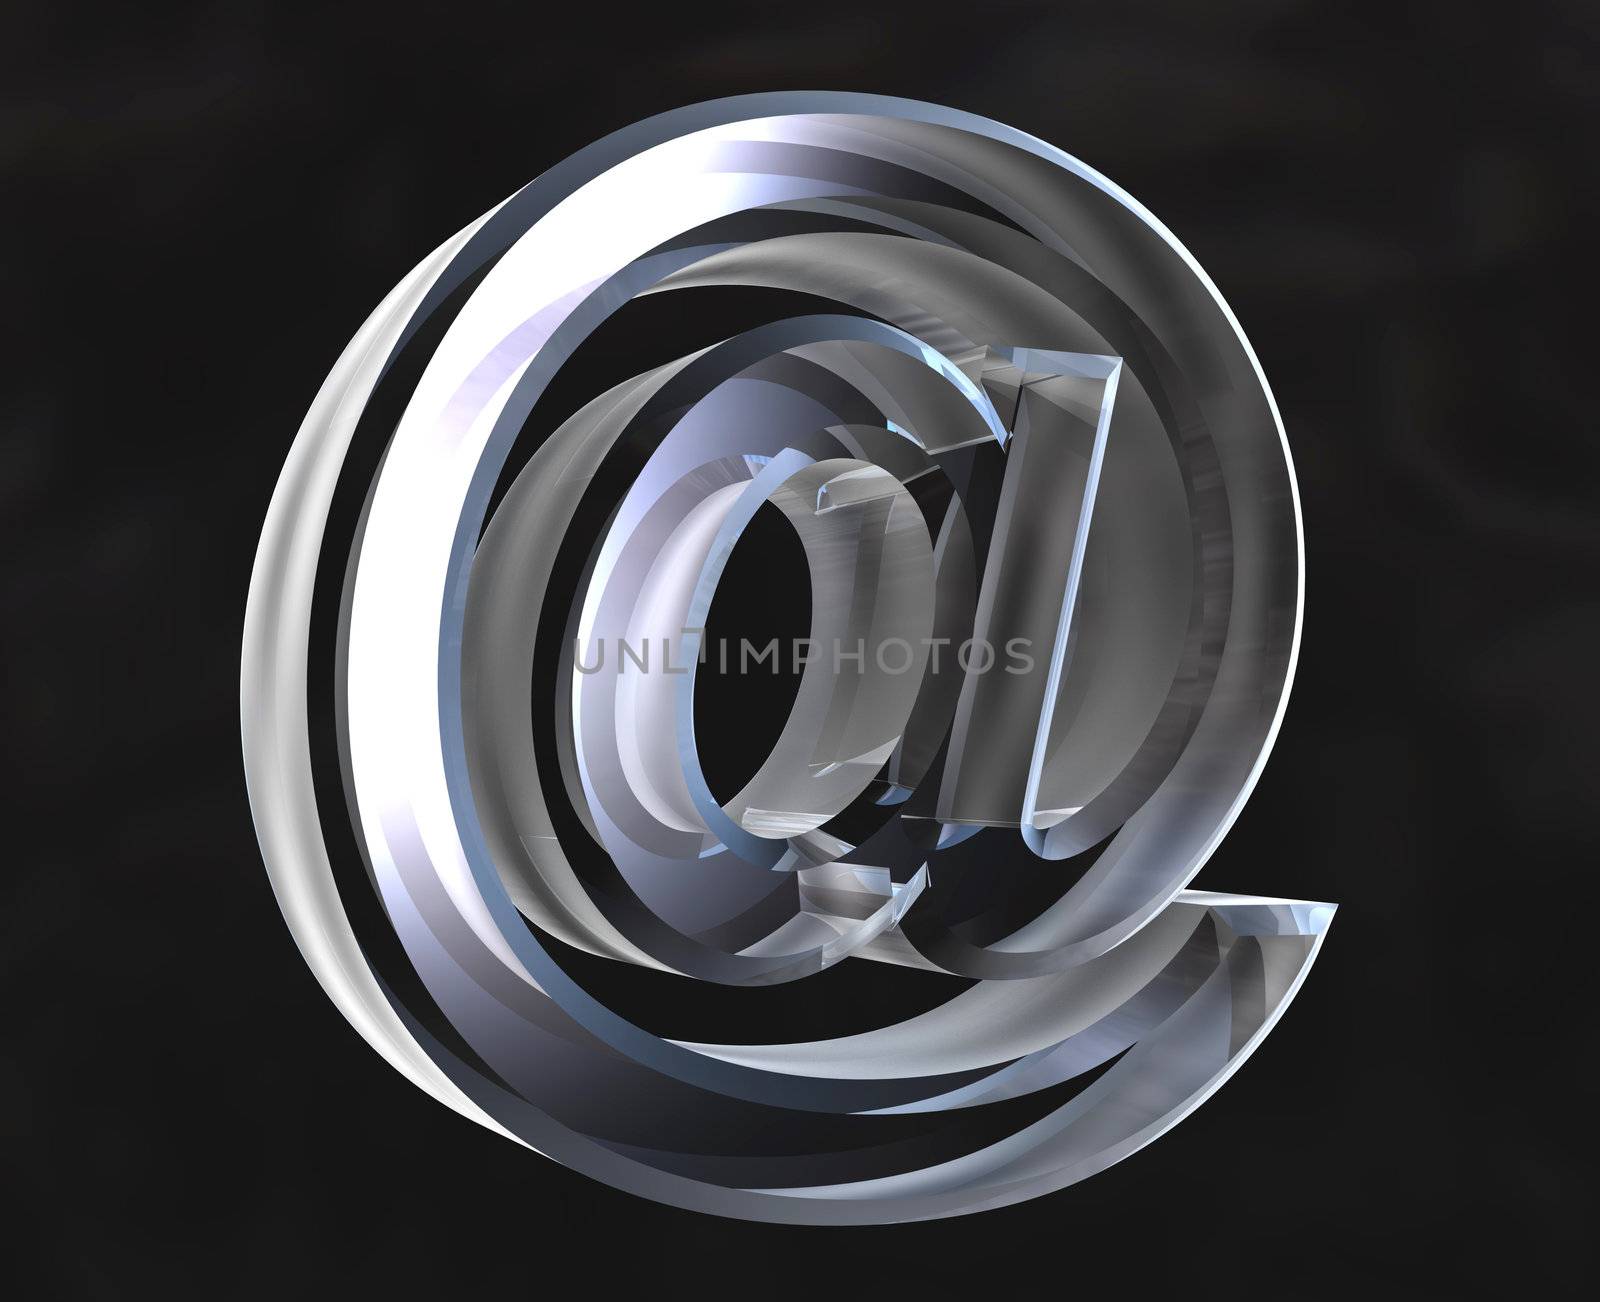 email symbol in transparent glass (3d made) 